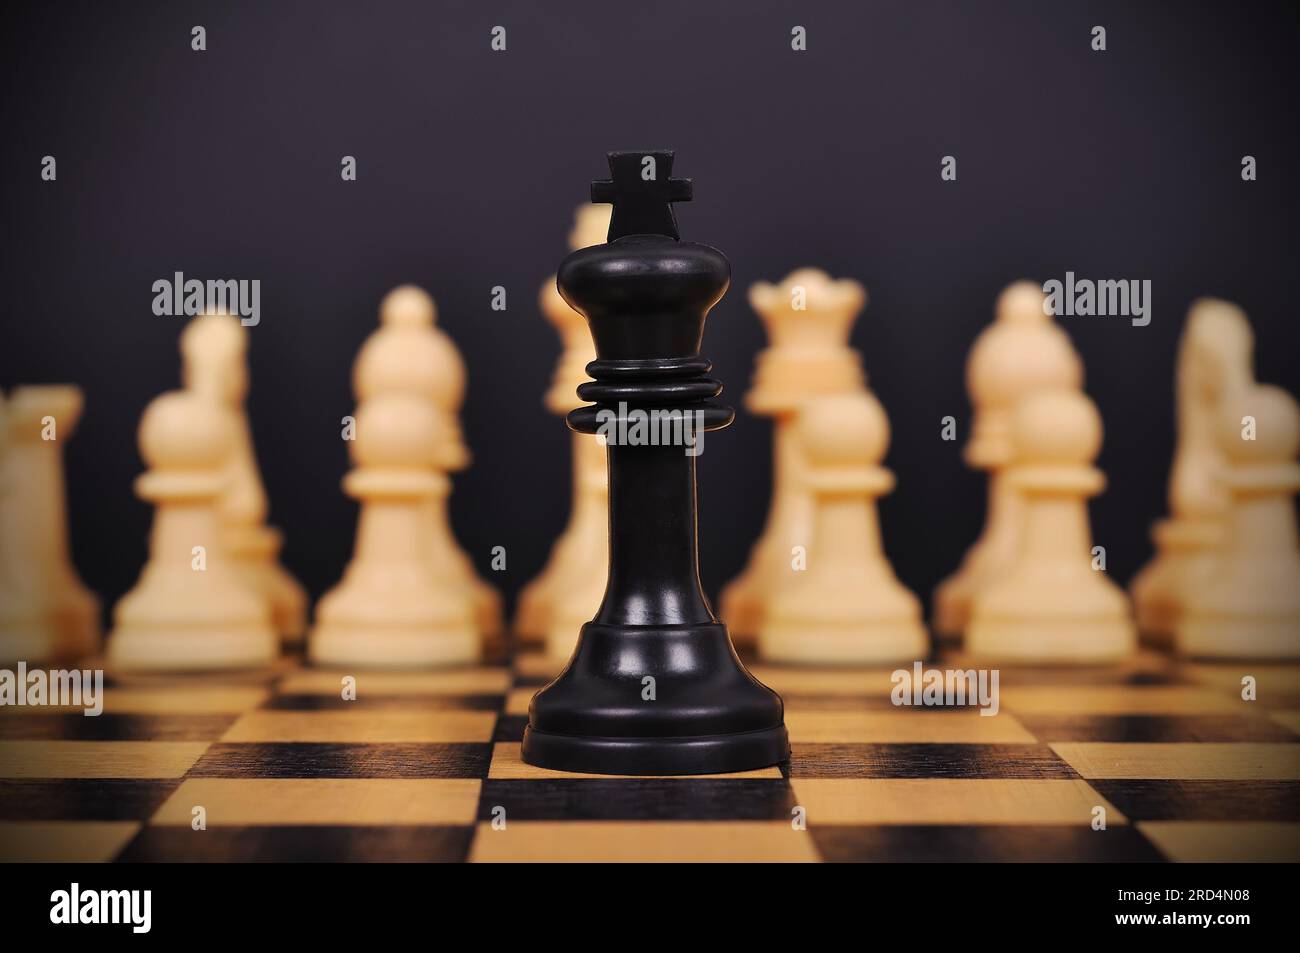 Black Chess King and other chess pieces on chess board Stock Photo